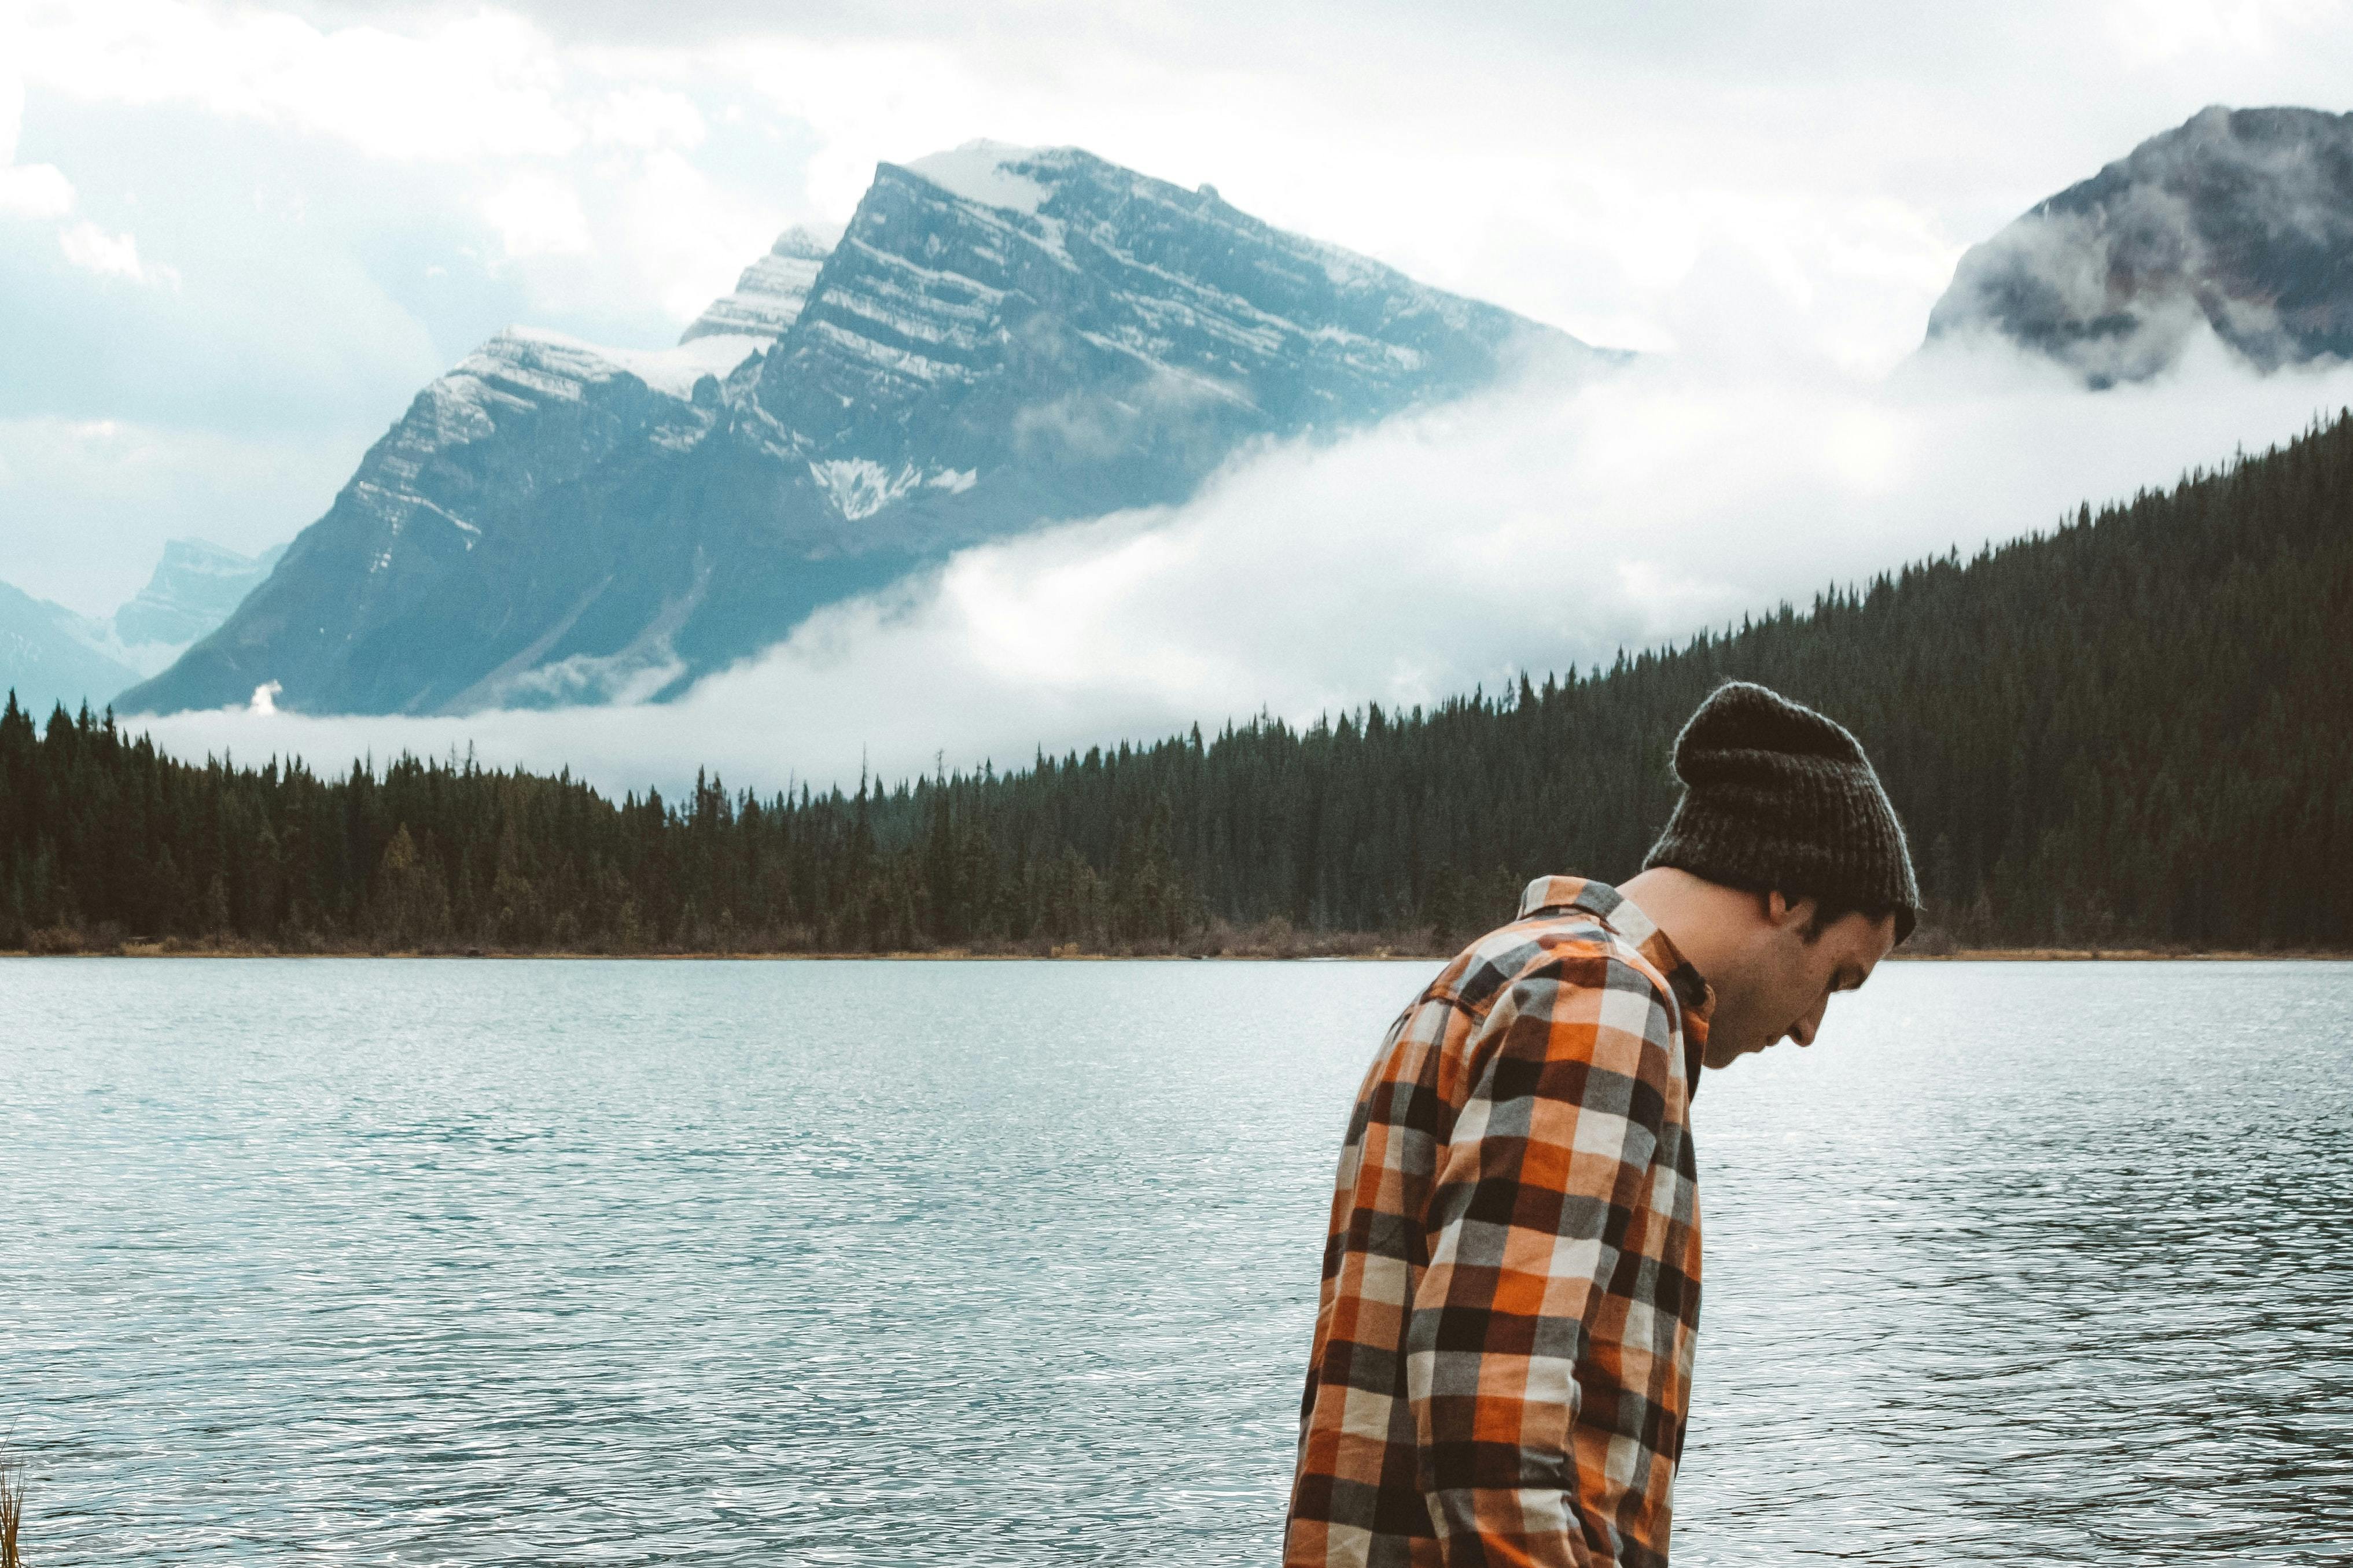 A man in a plaid shirt walks along a lake with a mountain and trees in the distance